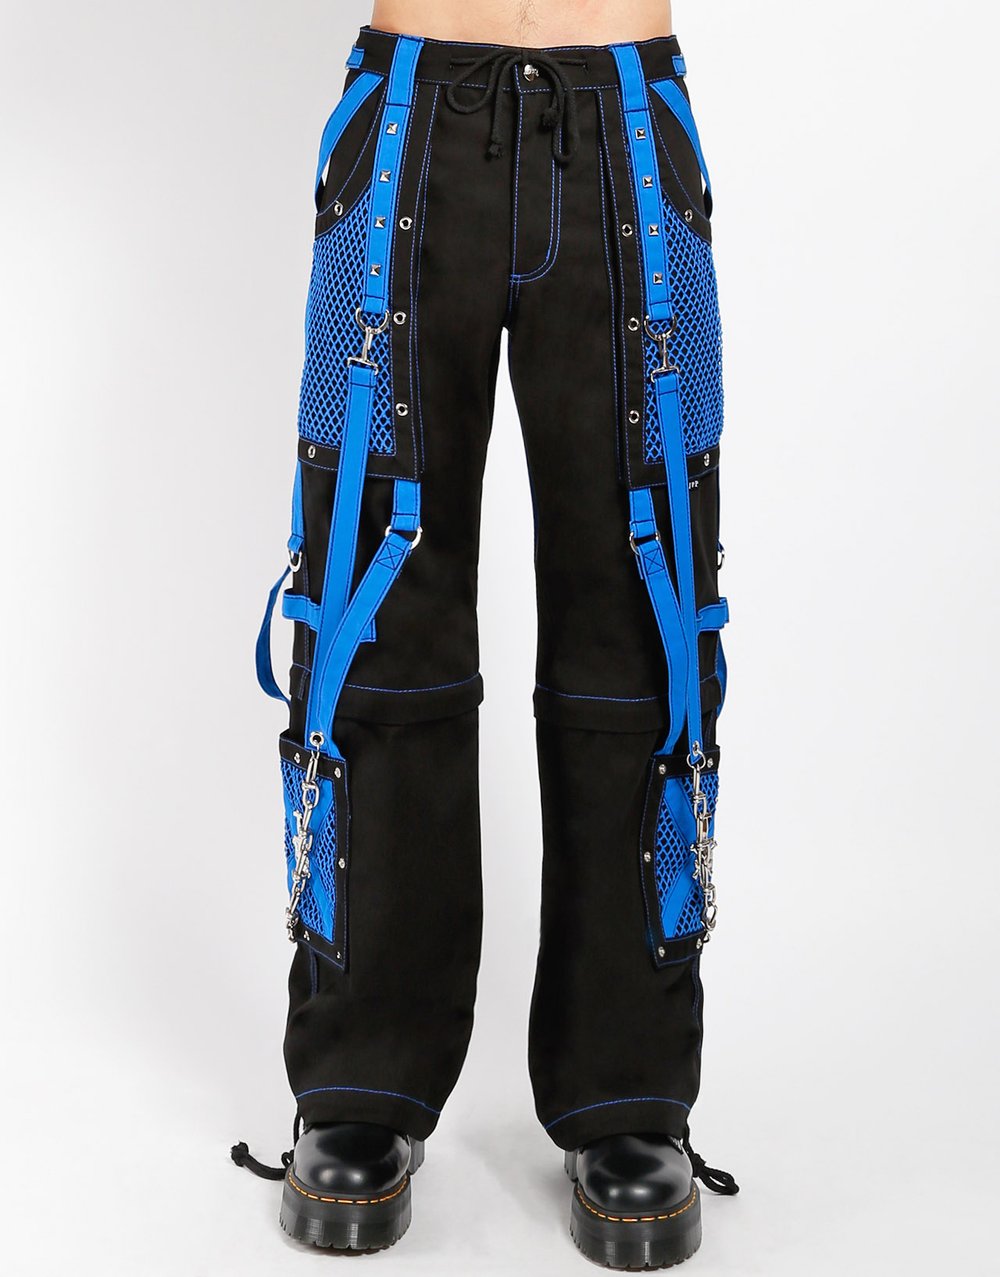 front of Black and blue studded pants zip off into shorts and feature removable chains, adjustable ankles, zippers, D-rings, and deep pockets.